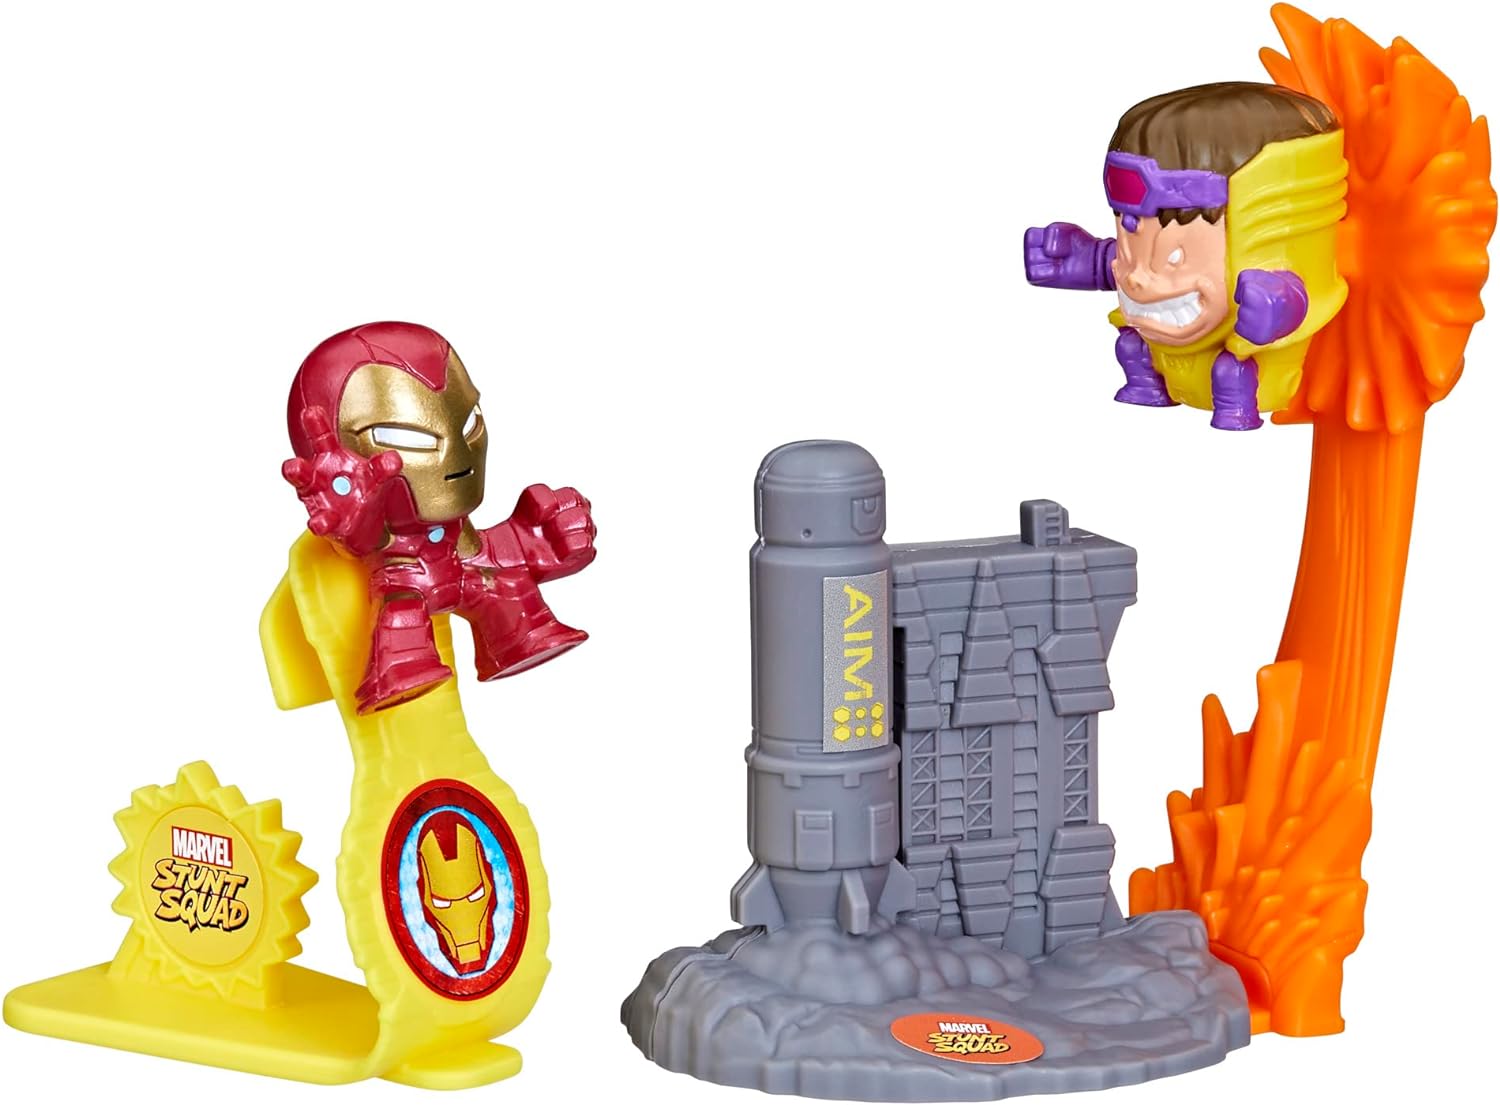 Marvel Stunt Squad Iron Man vs. M.O.D.O.K. Playset, 1.5-Inch Super Hero Action Figures, Toys for Kids Ages 4 and Up